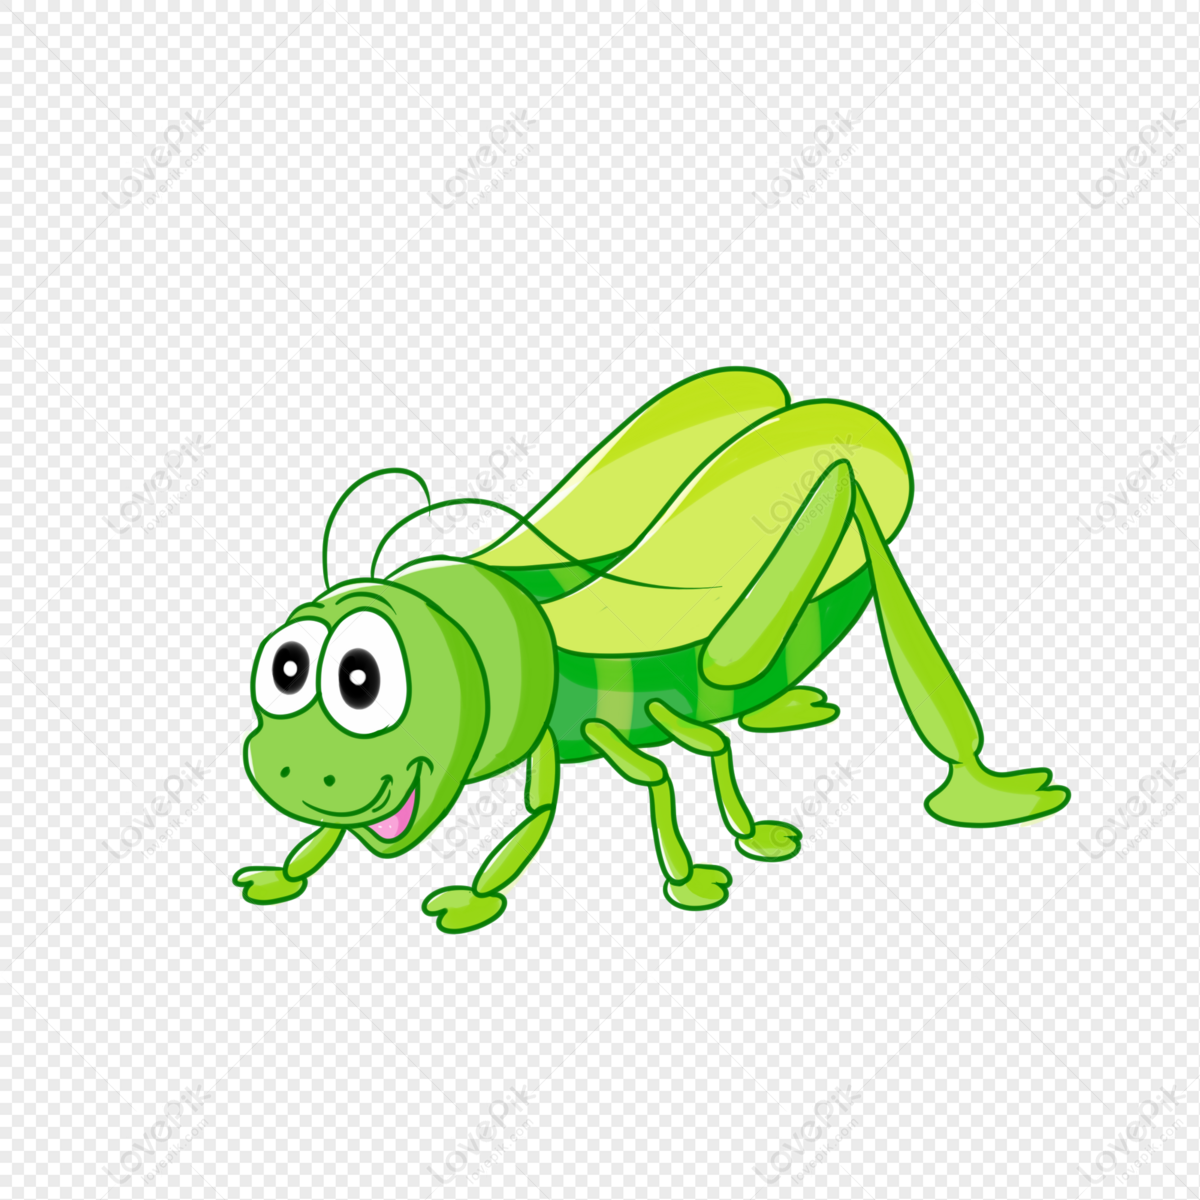 Small Animal Grasshopper PNG Image Free Download And Clipart Image For Free  Download - Lovepik | 401550071